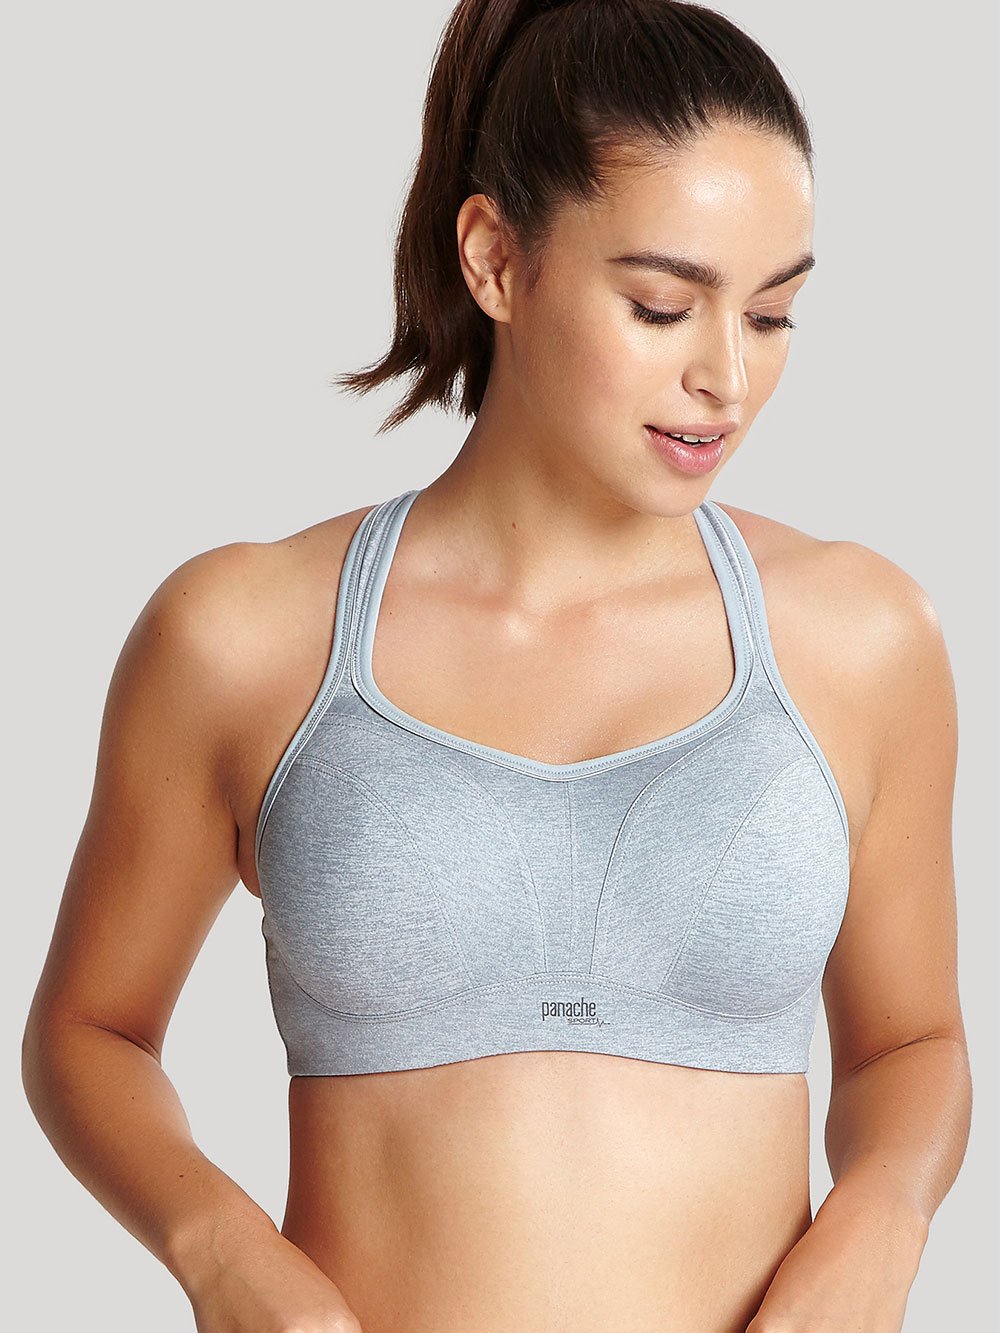 32E Bras: Bras for 32E Boobs and Breast Size Tagged Sports Bras -  HauteFlair